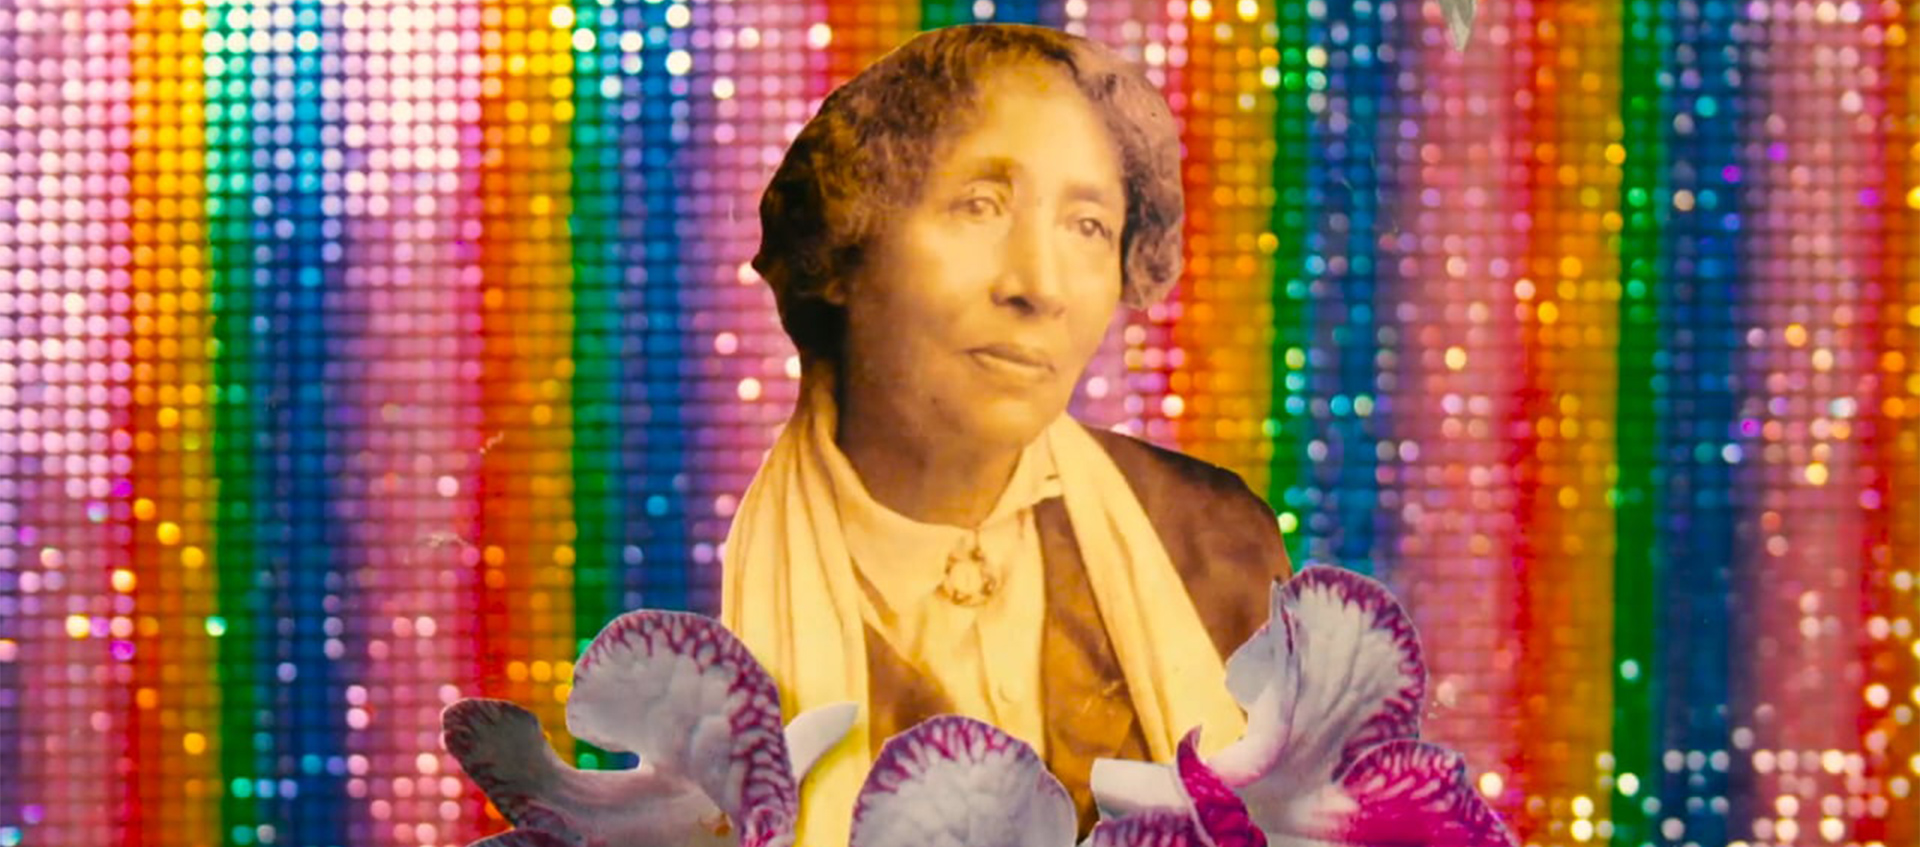 A vintage sepia image of a woman holding white and violet orchids against a sequined rainbow background